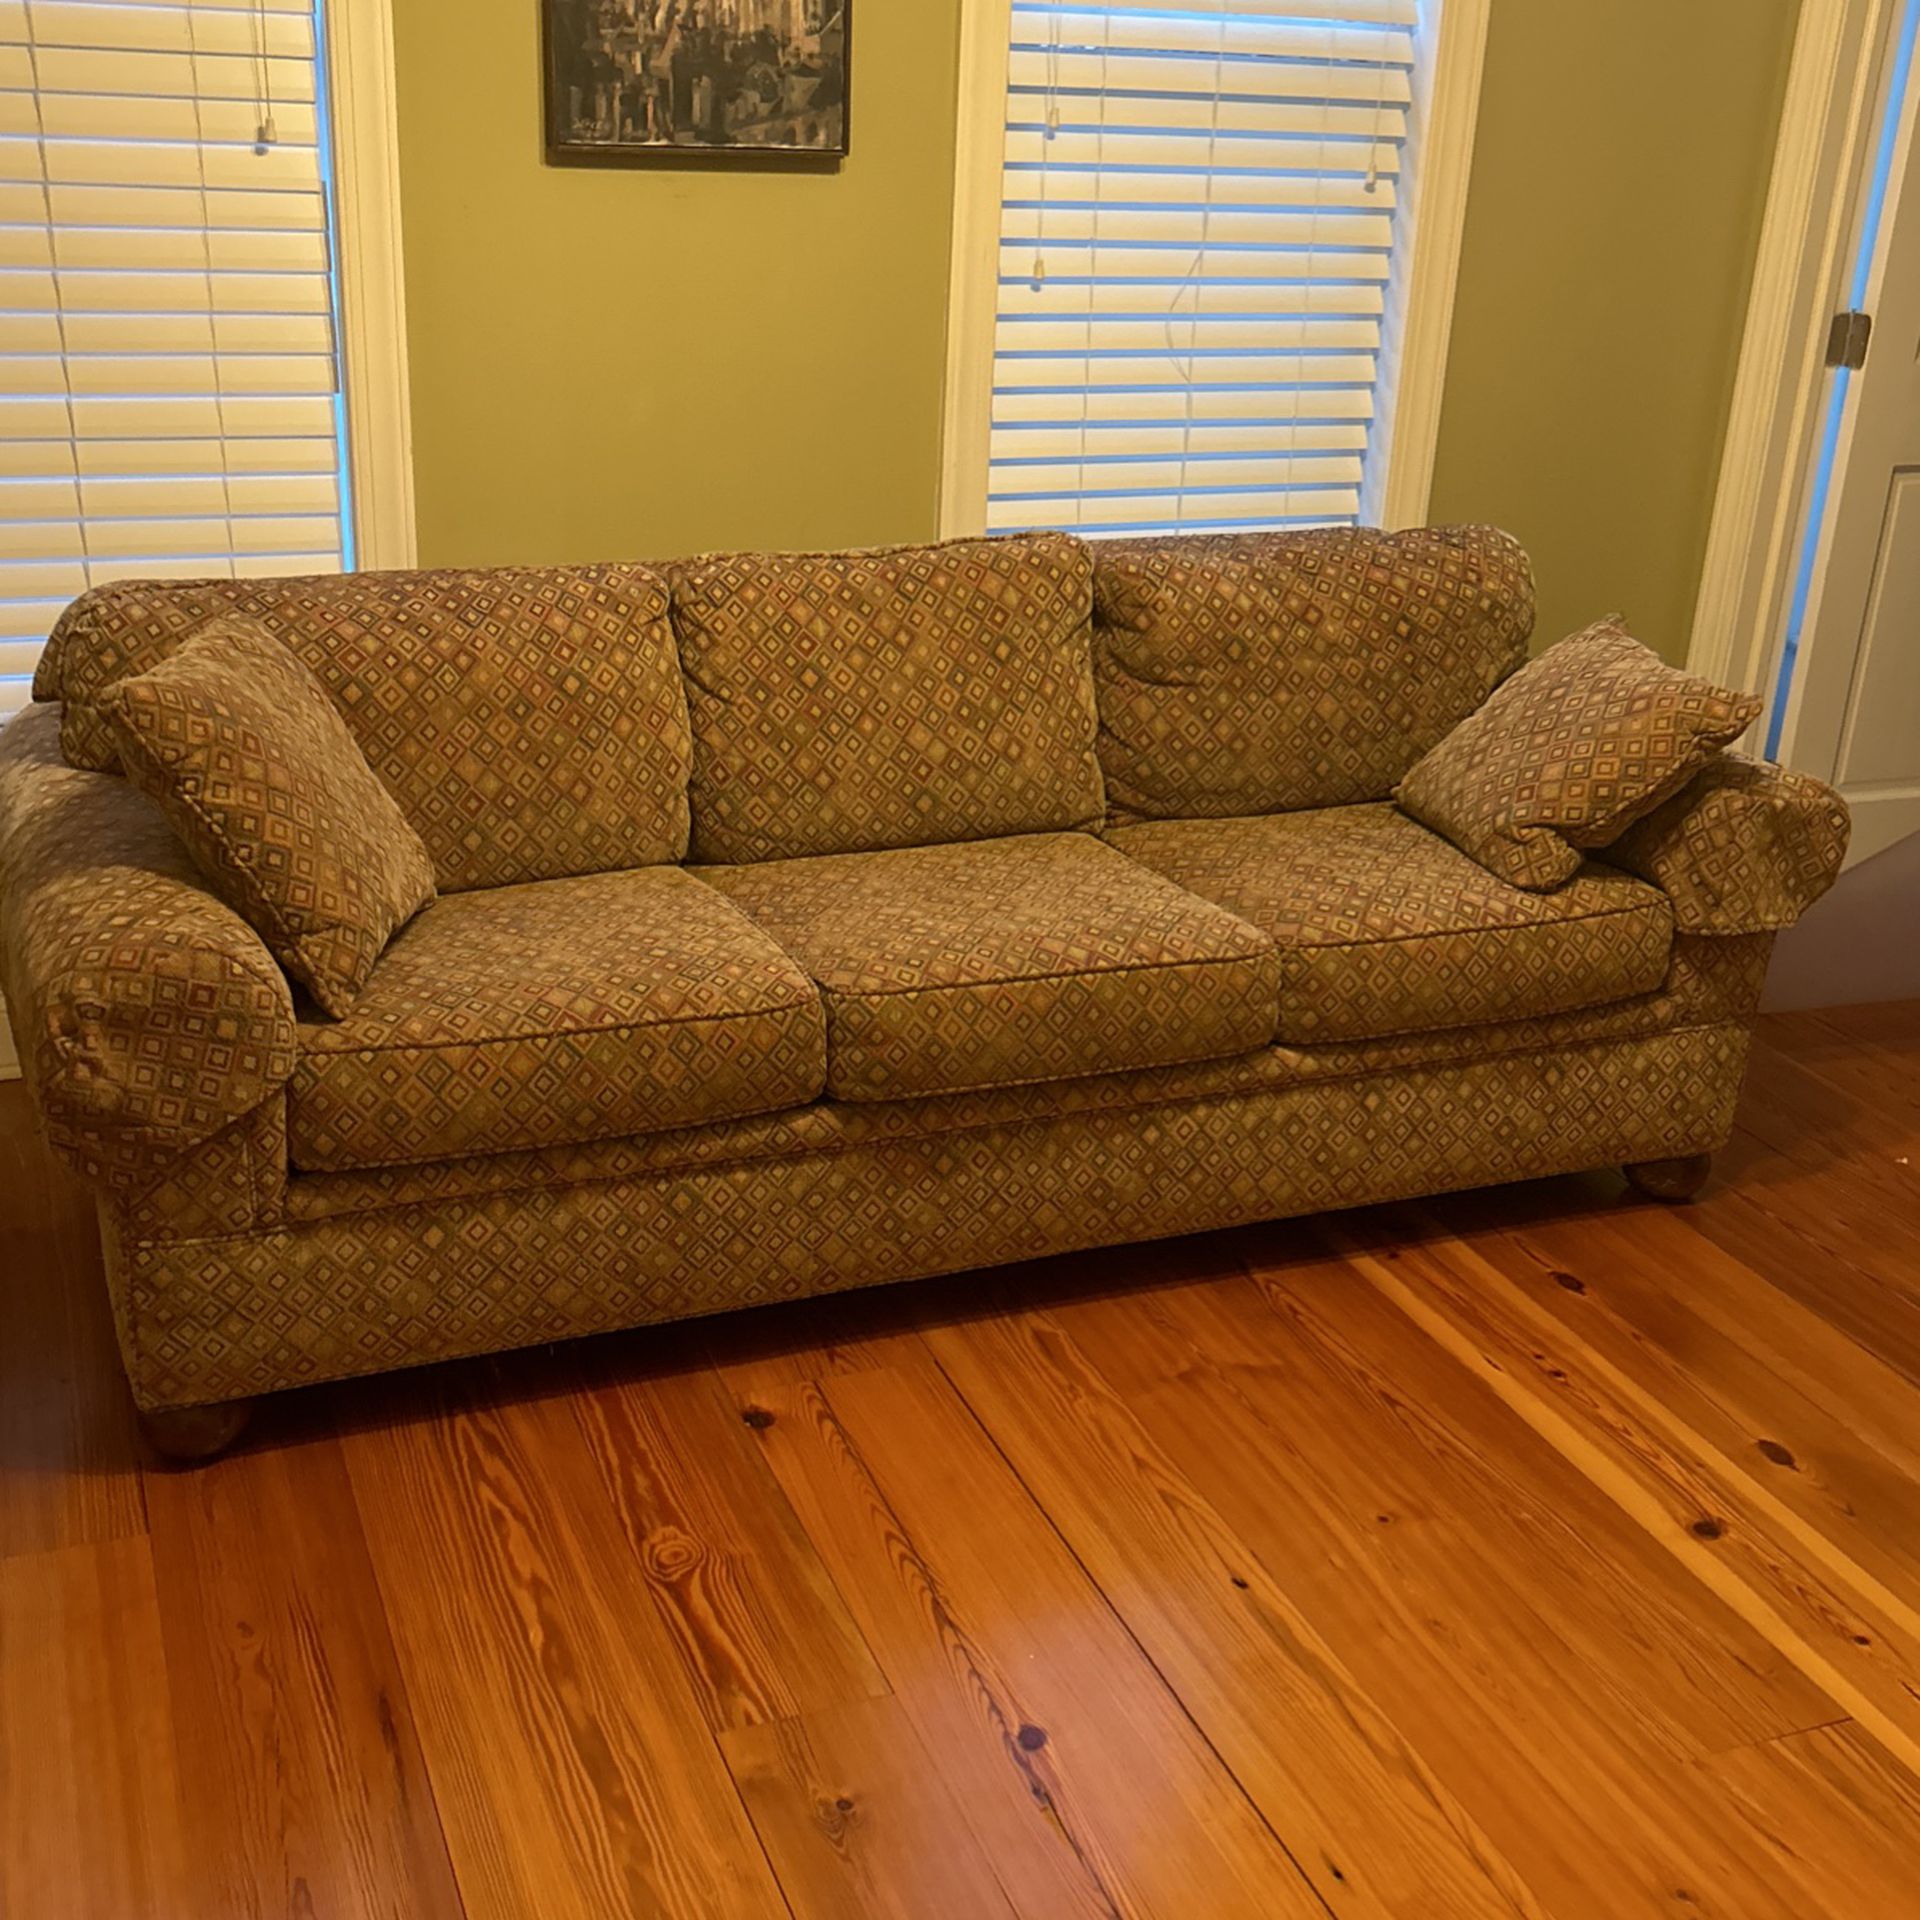 Queen Sleeper Couch  Excellent Like New Condition